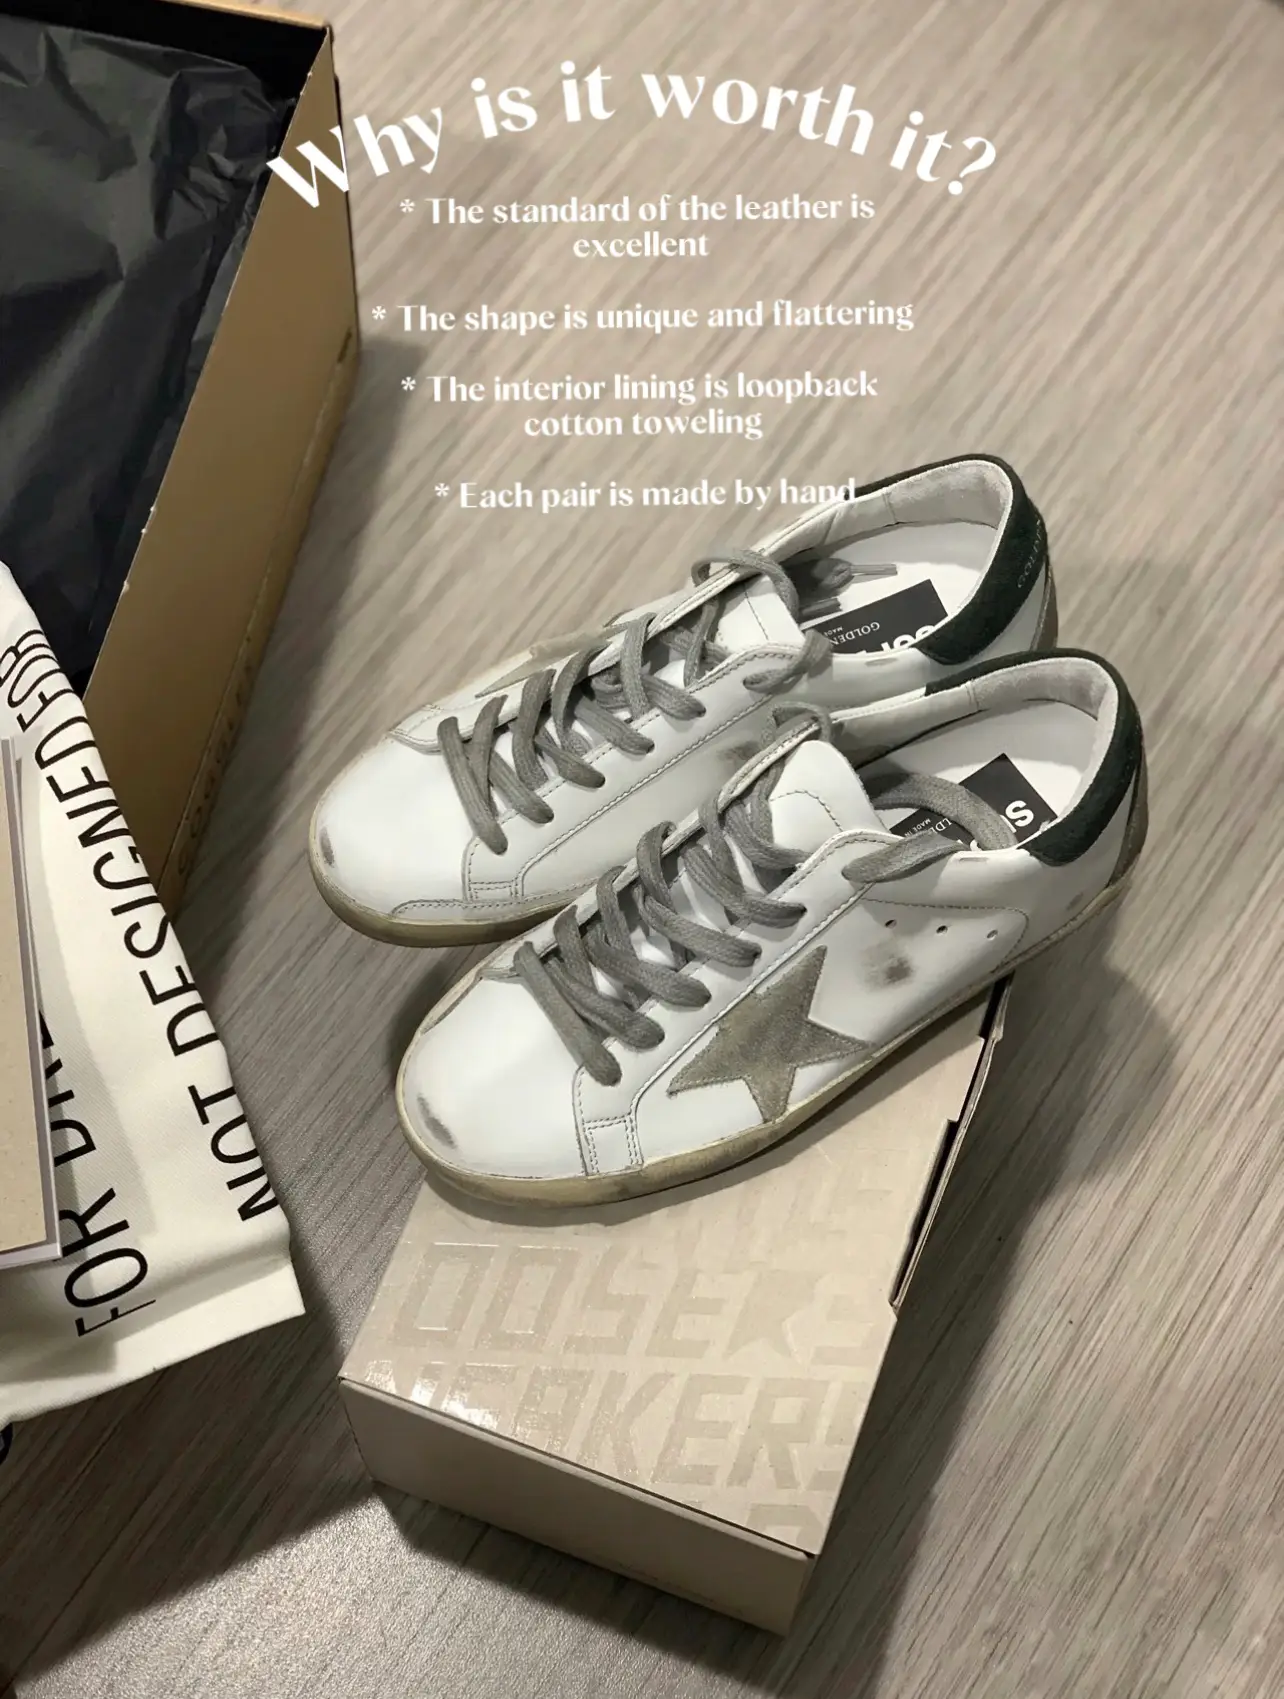 My Honest Review of the Golden Goose Purestar Sneakers - Fashion